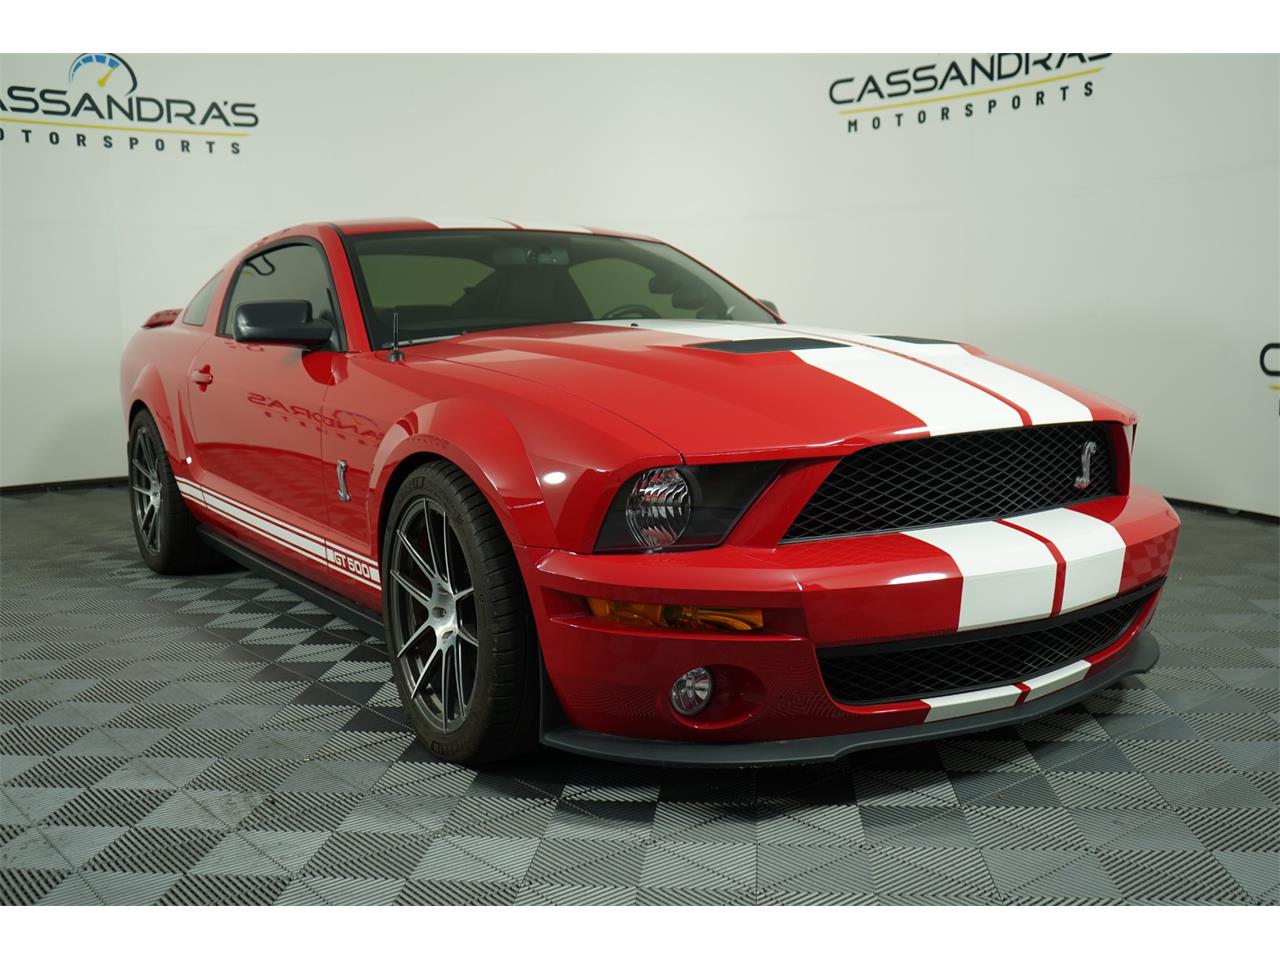 For Sale: 2007 Shelby GT500 in Pewaukee, Wisconsin for sale in Pewaukee, WI